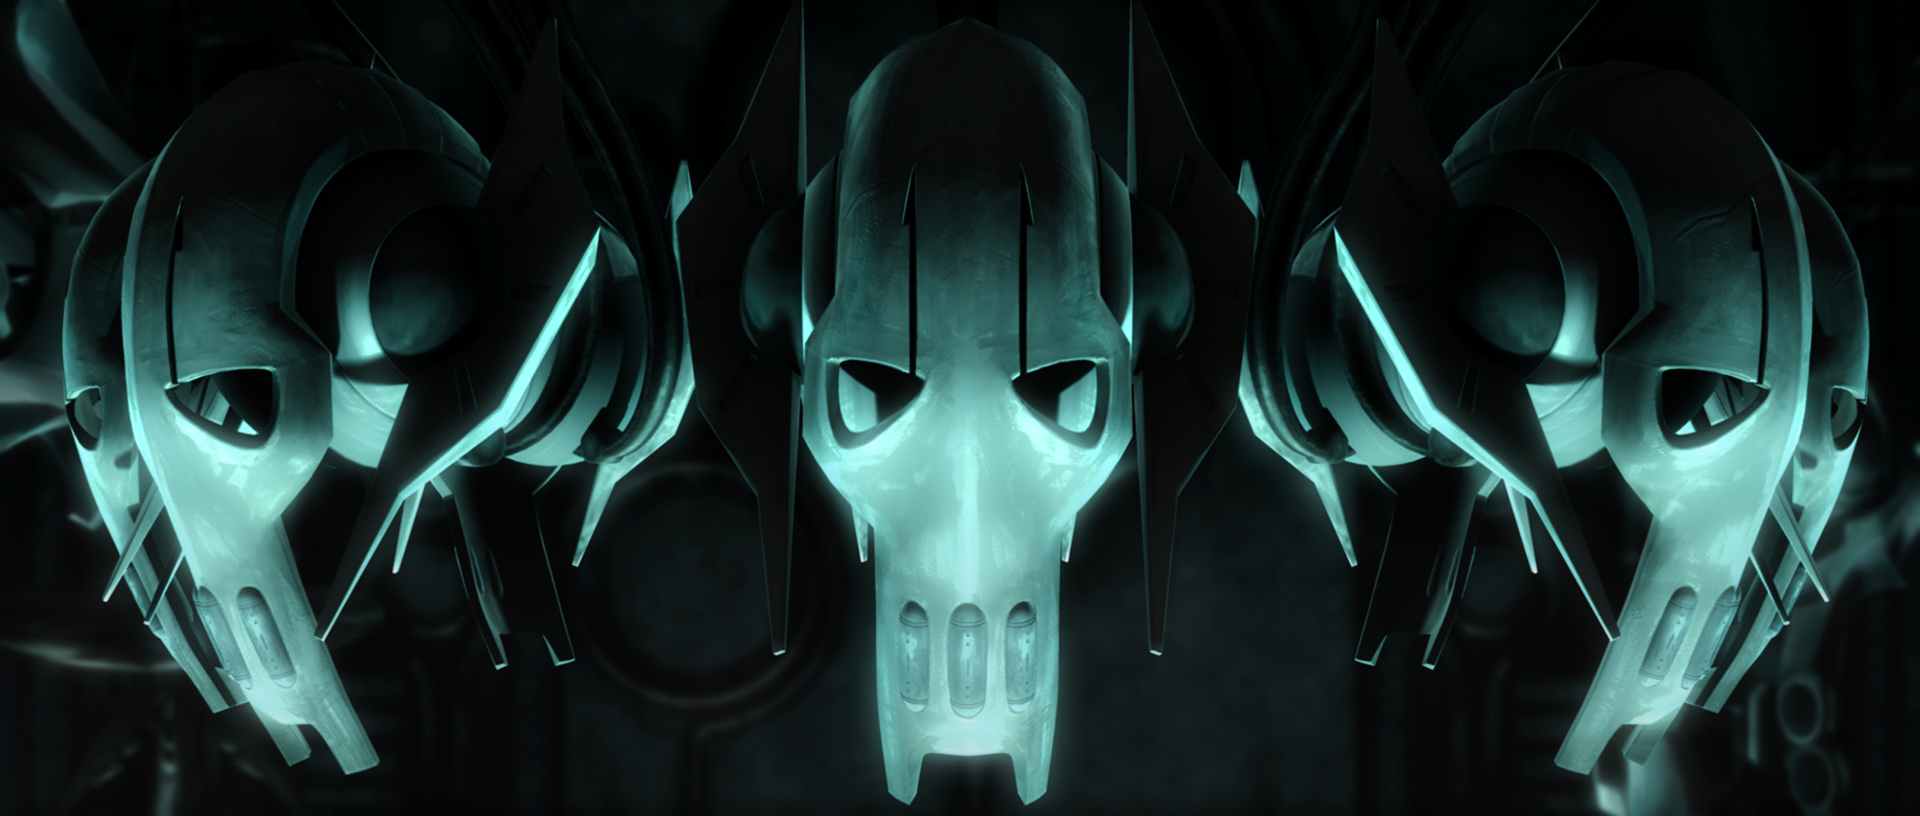 general grievous attack of the clones